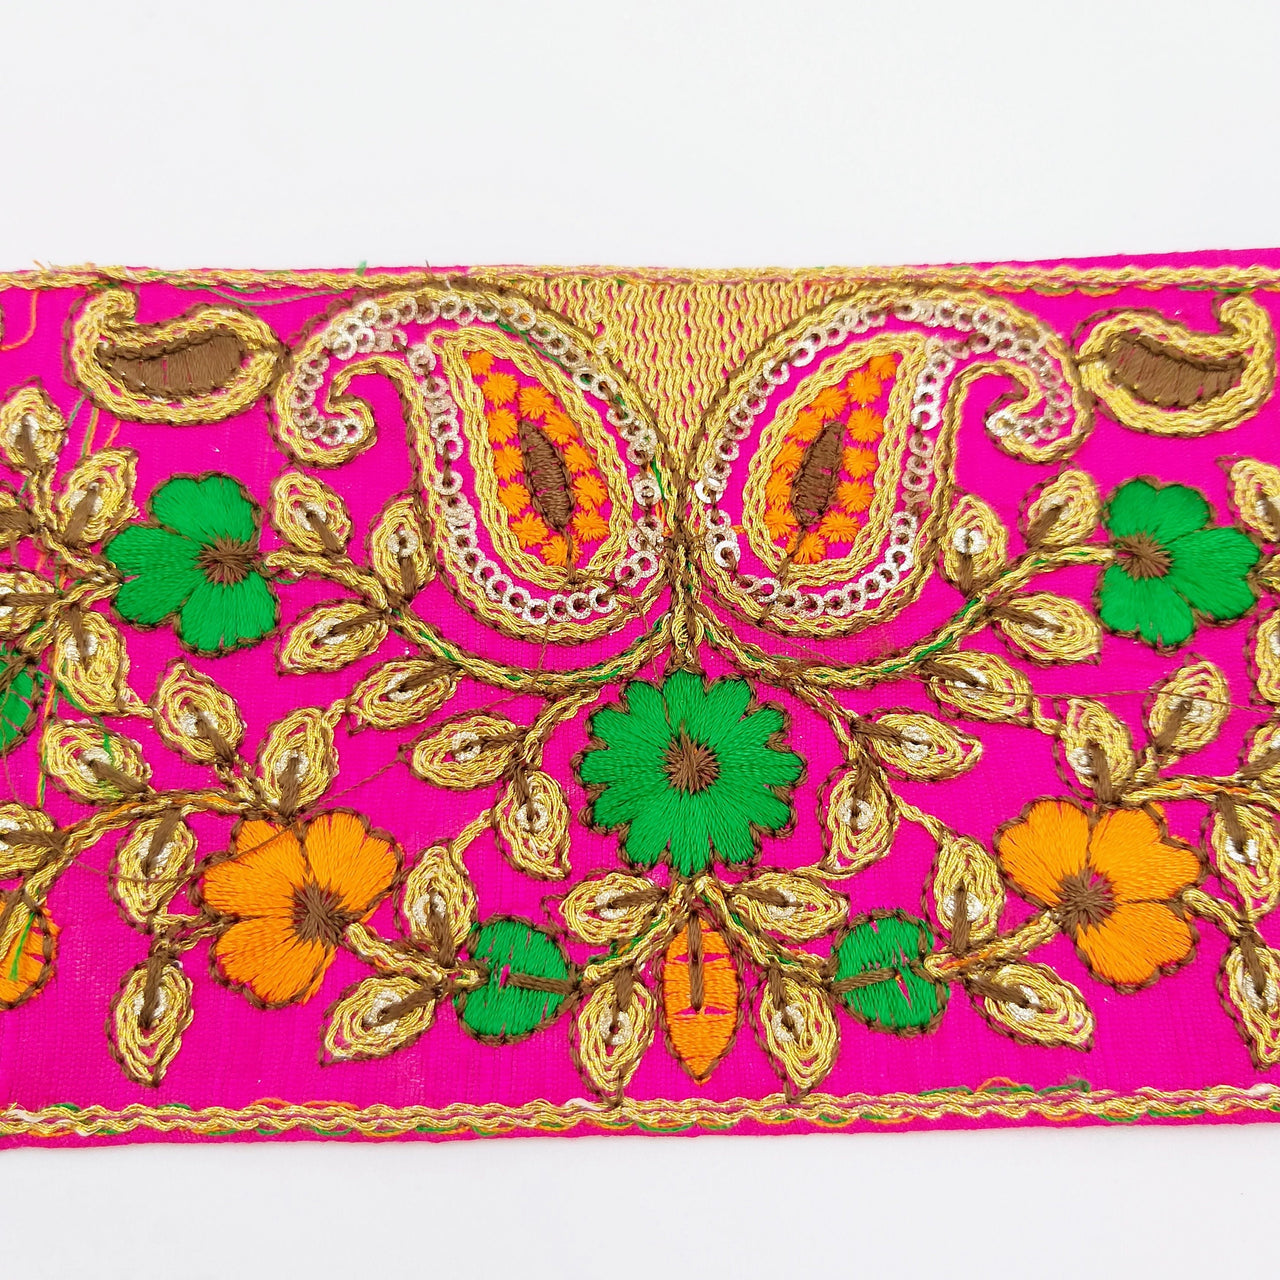 Fuchsia Pink Art Silk Fabric Trim With Intricate Floral Embroidery, Approx. 90mm wide, Trim By Yard Decorative Sari Border